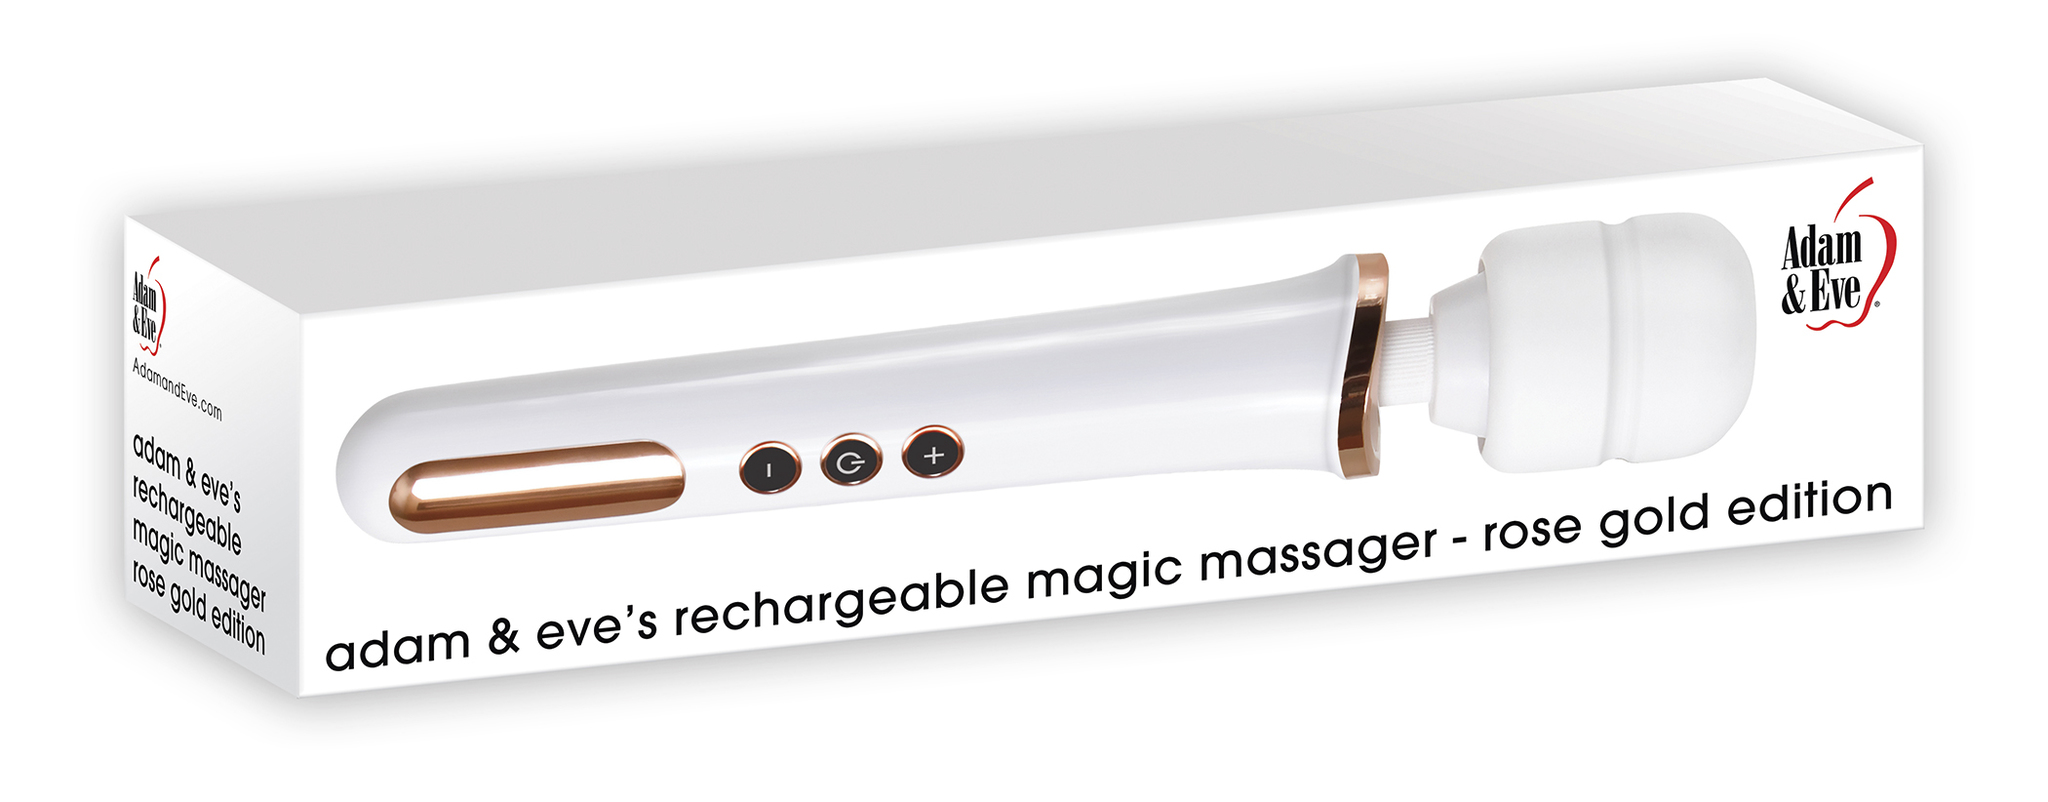 ADAM & EVE MAGIC MASSAGER RECHARGEABLE ROSE GOLD EDITION - ENAEWF31452